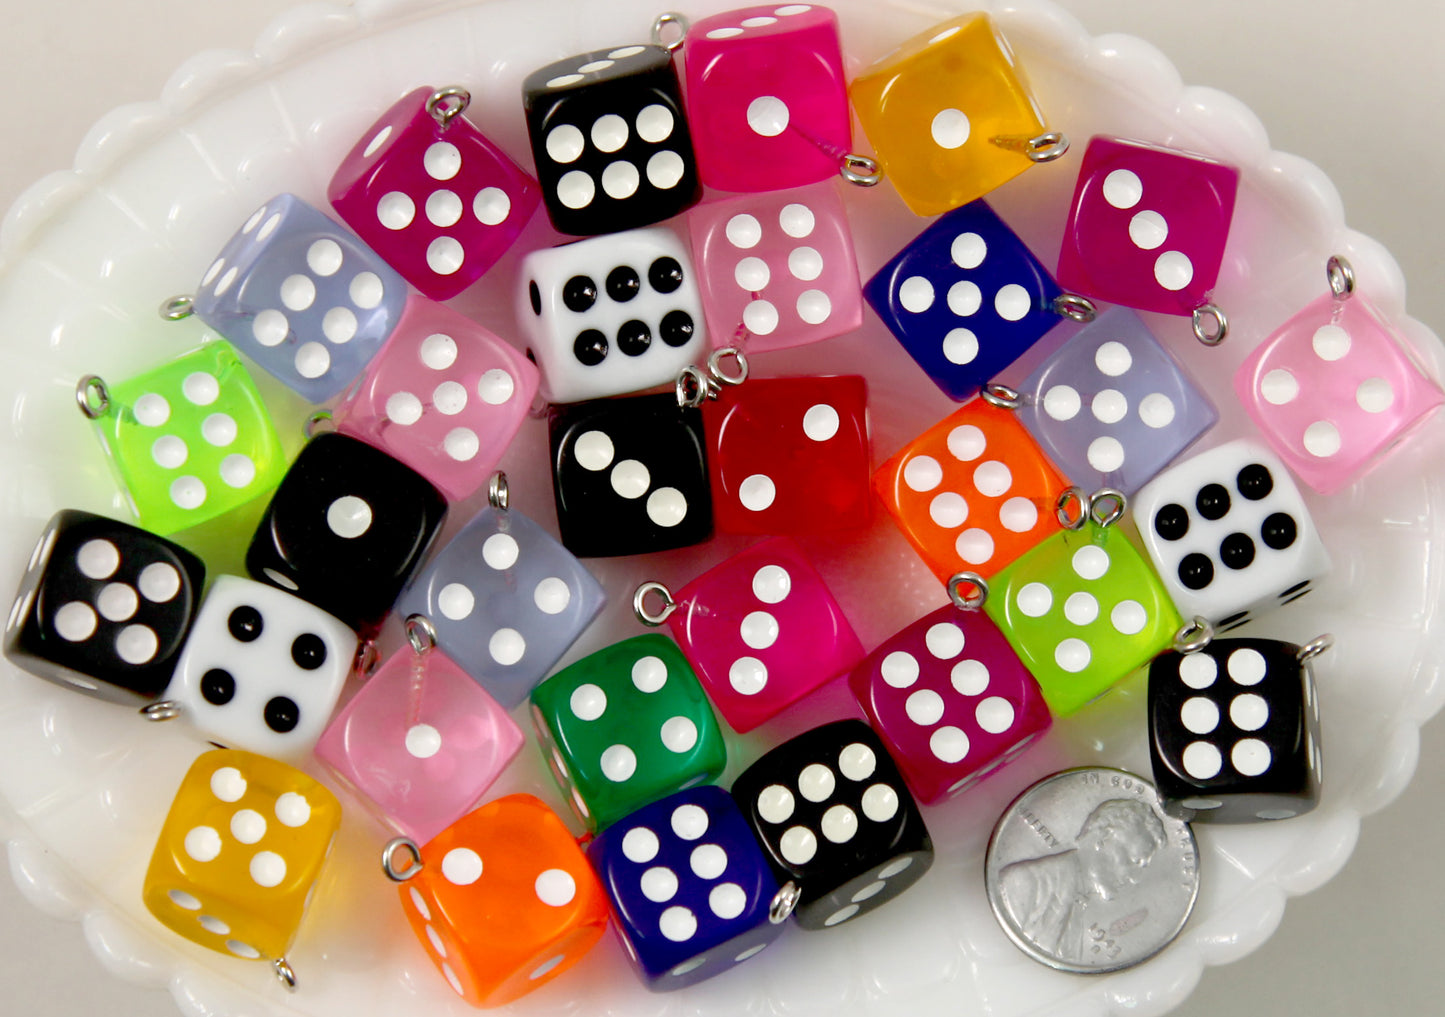 Dice Charms - 14mm D6 Dice Colorful Resin Charms Acrylic or Resin Pendants - 12 pc set